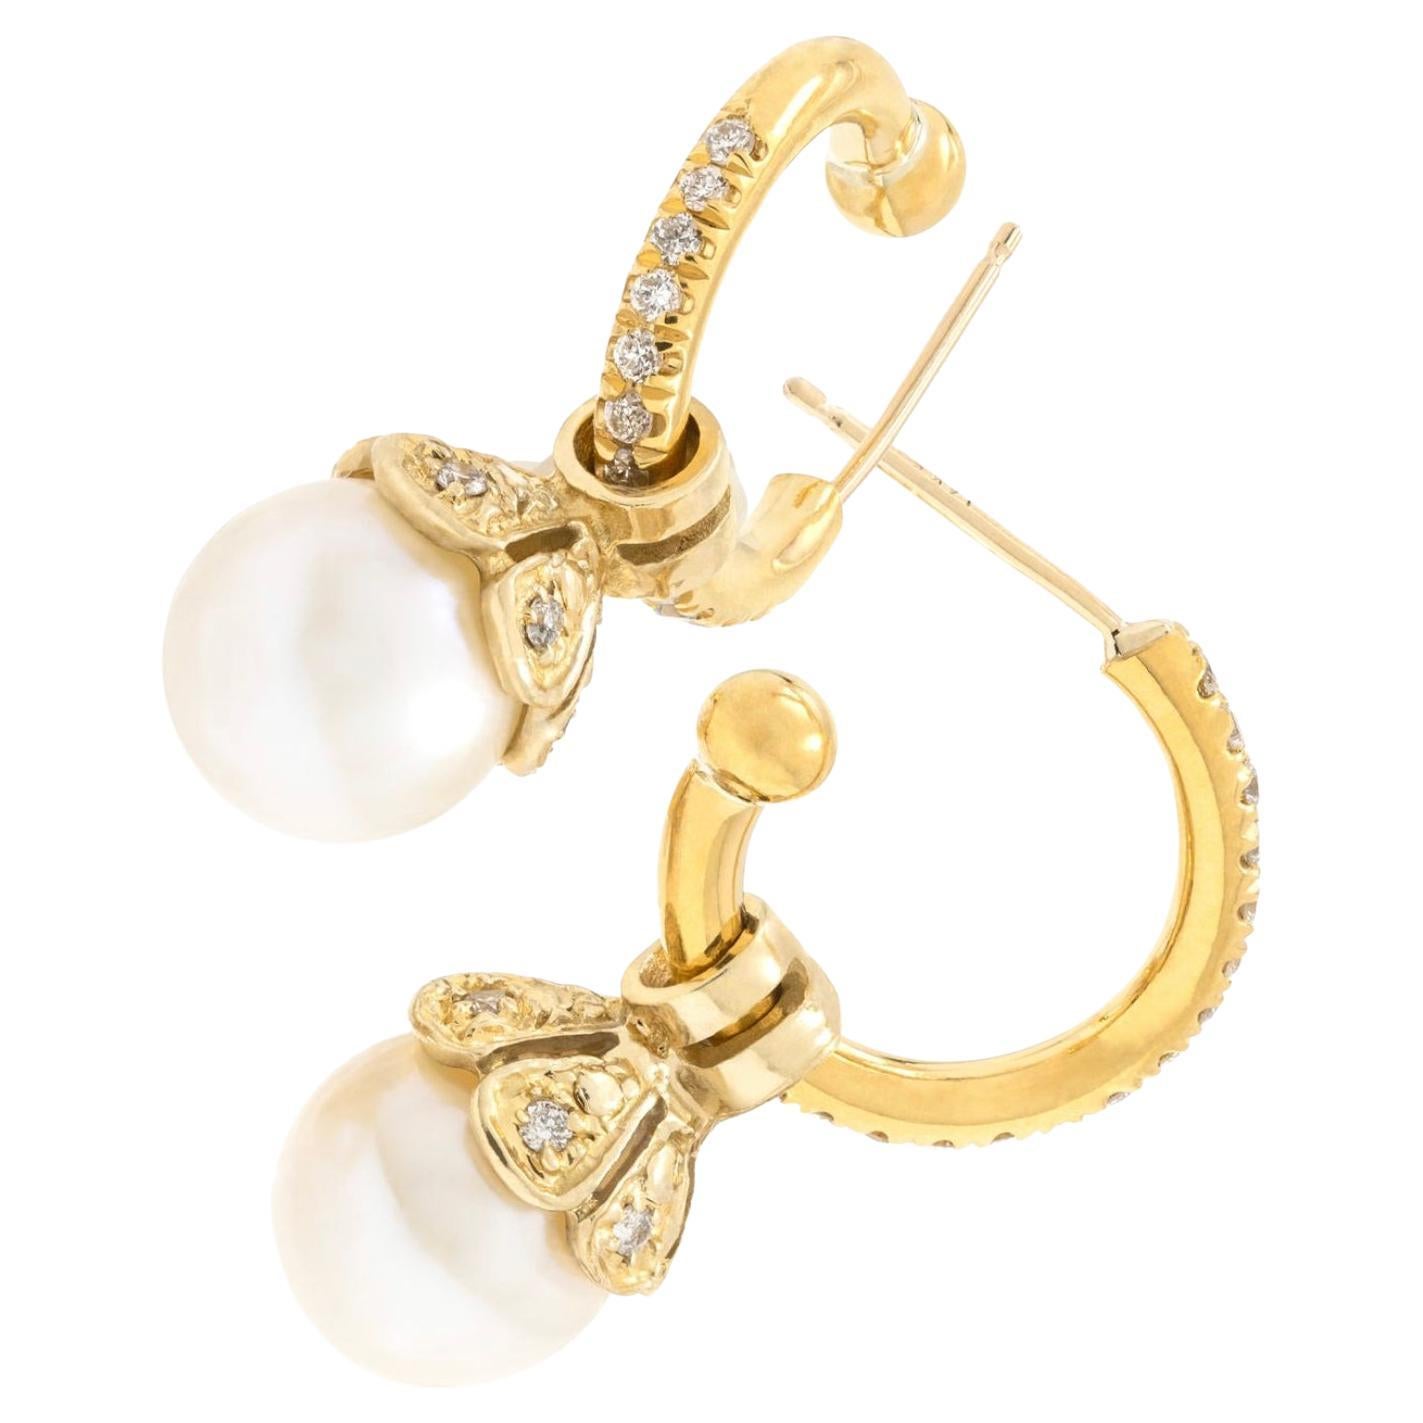 Paris & Lily, 22k Gold, Diamond Hoop Earrings with Removable Pearl Pendants